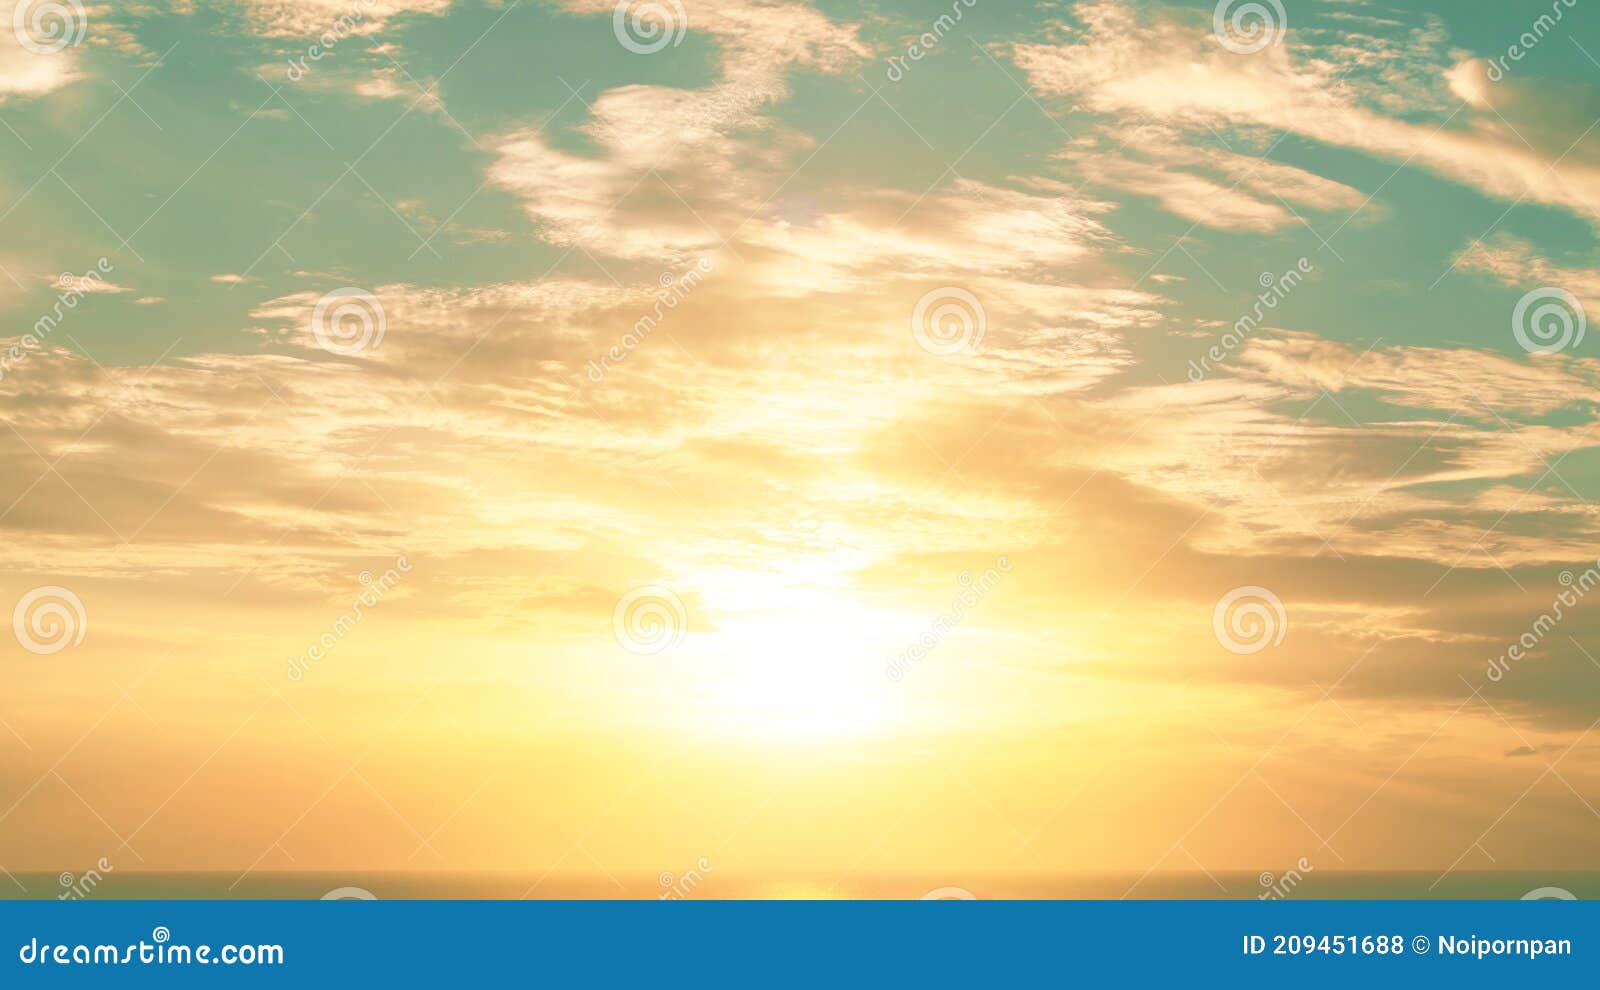 Good Morning Sunrise or Sunset Evening Sky Background with Cloud ...